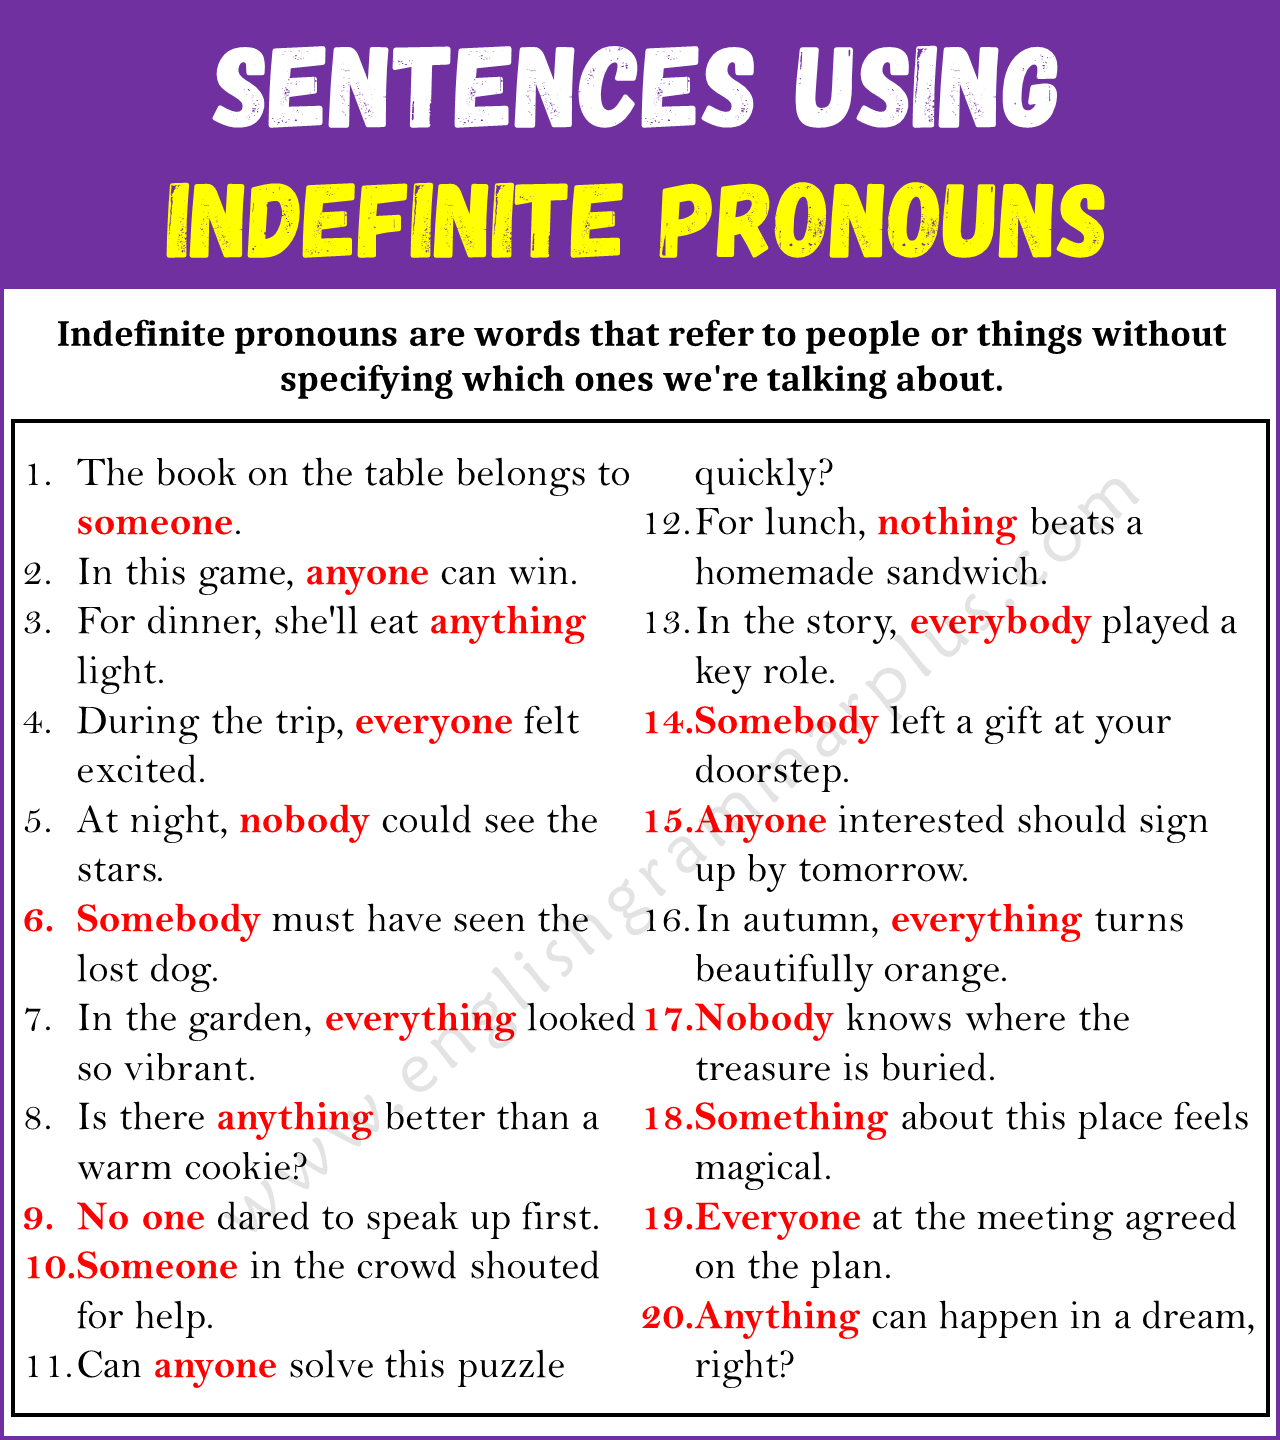 Examples of Indefinite Pronouns in Sentences